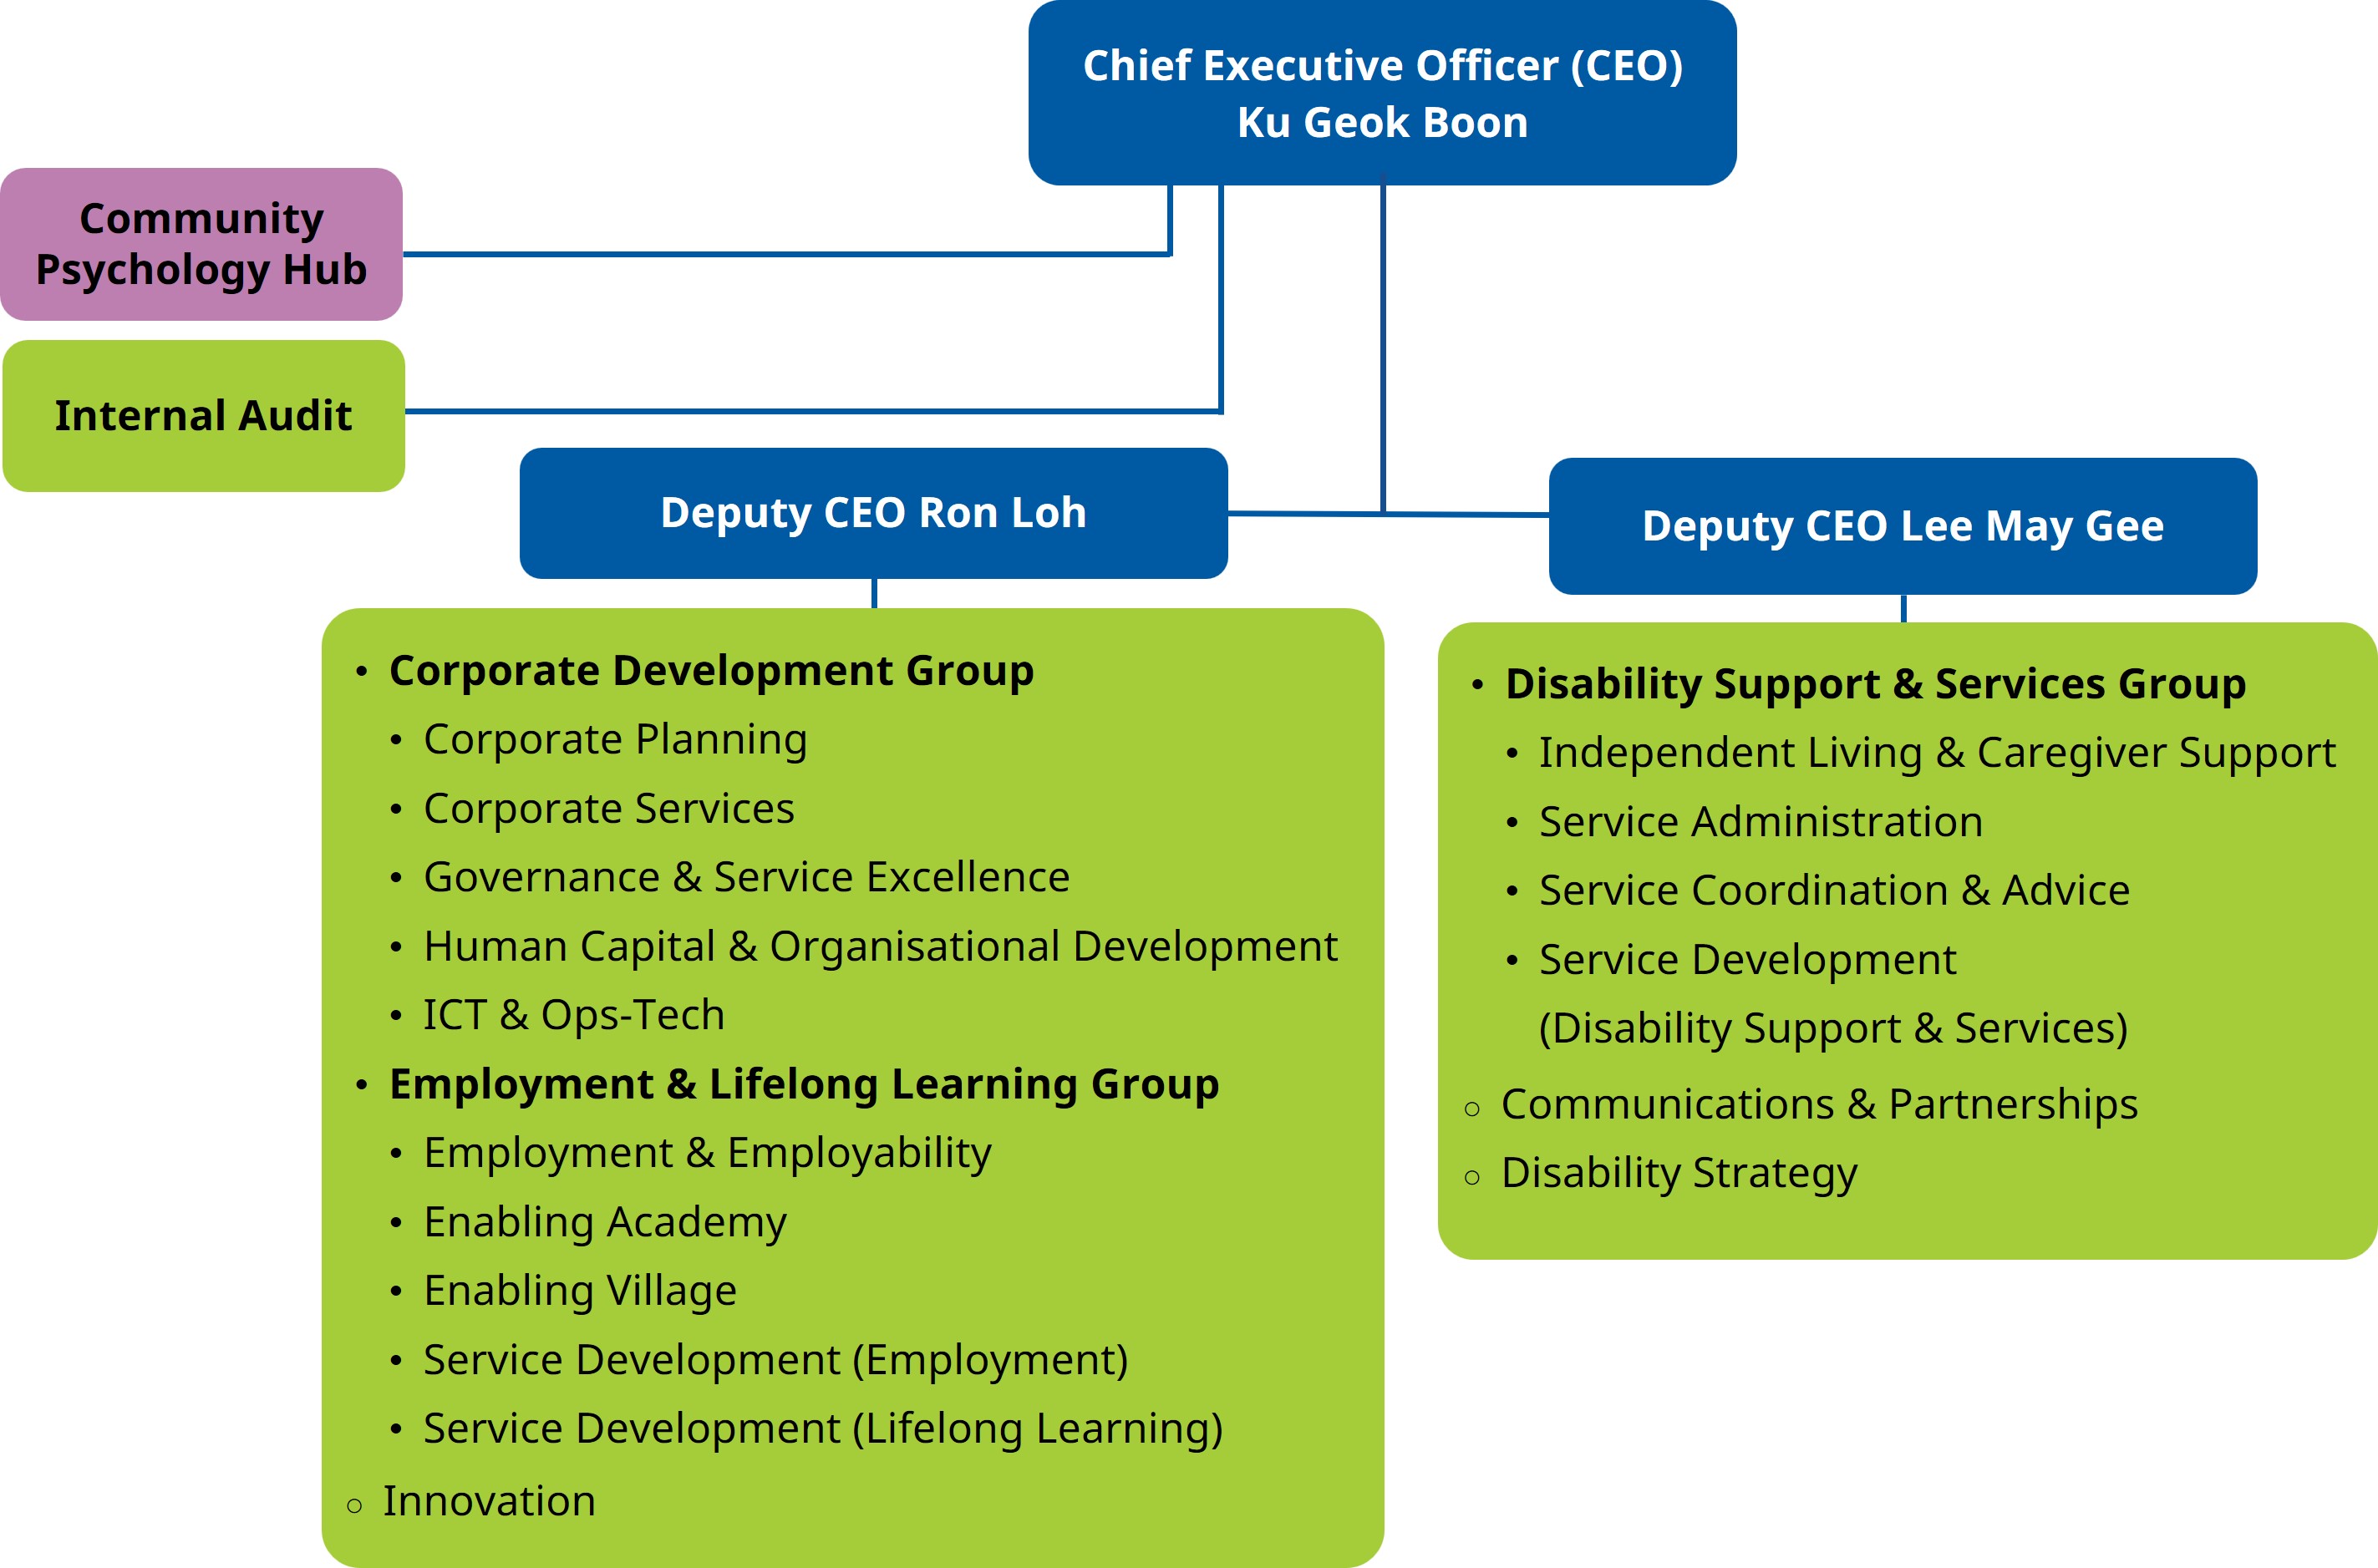 Organisational chart of SG Enable, showing the teams that report to the CEO and each of the two deputy CEOs.